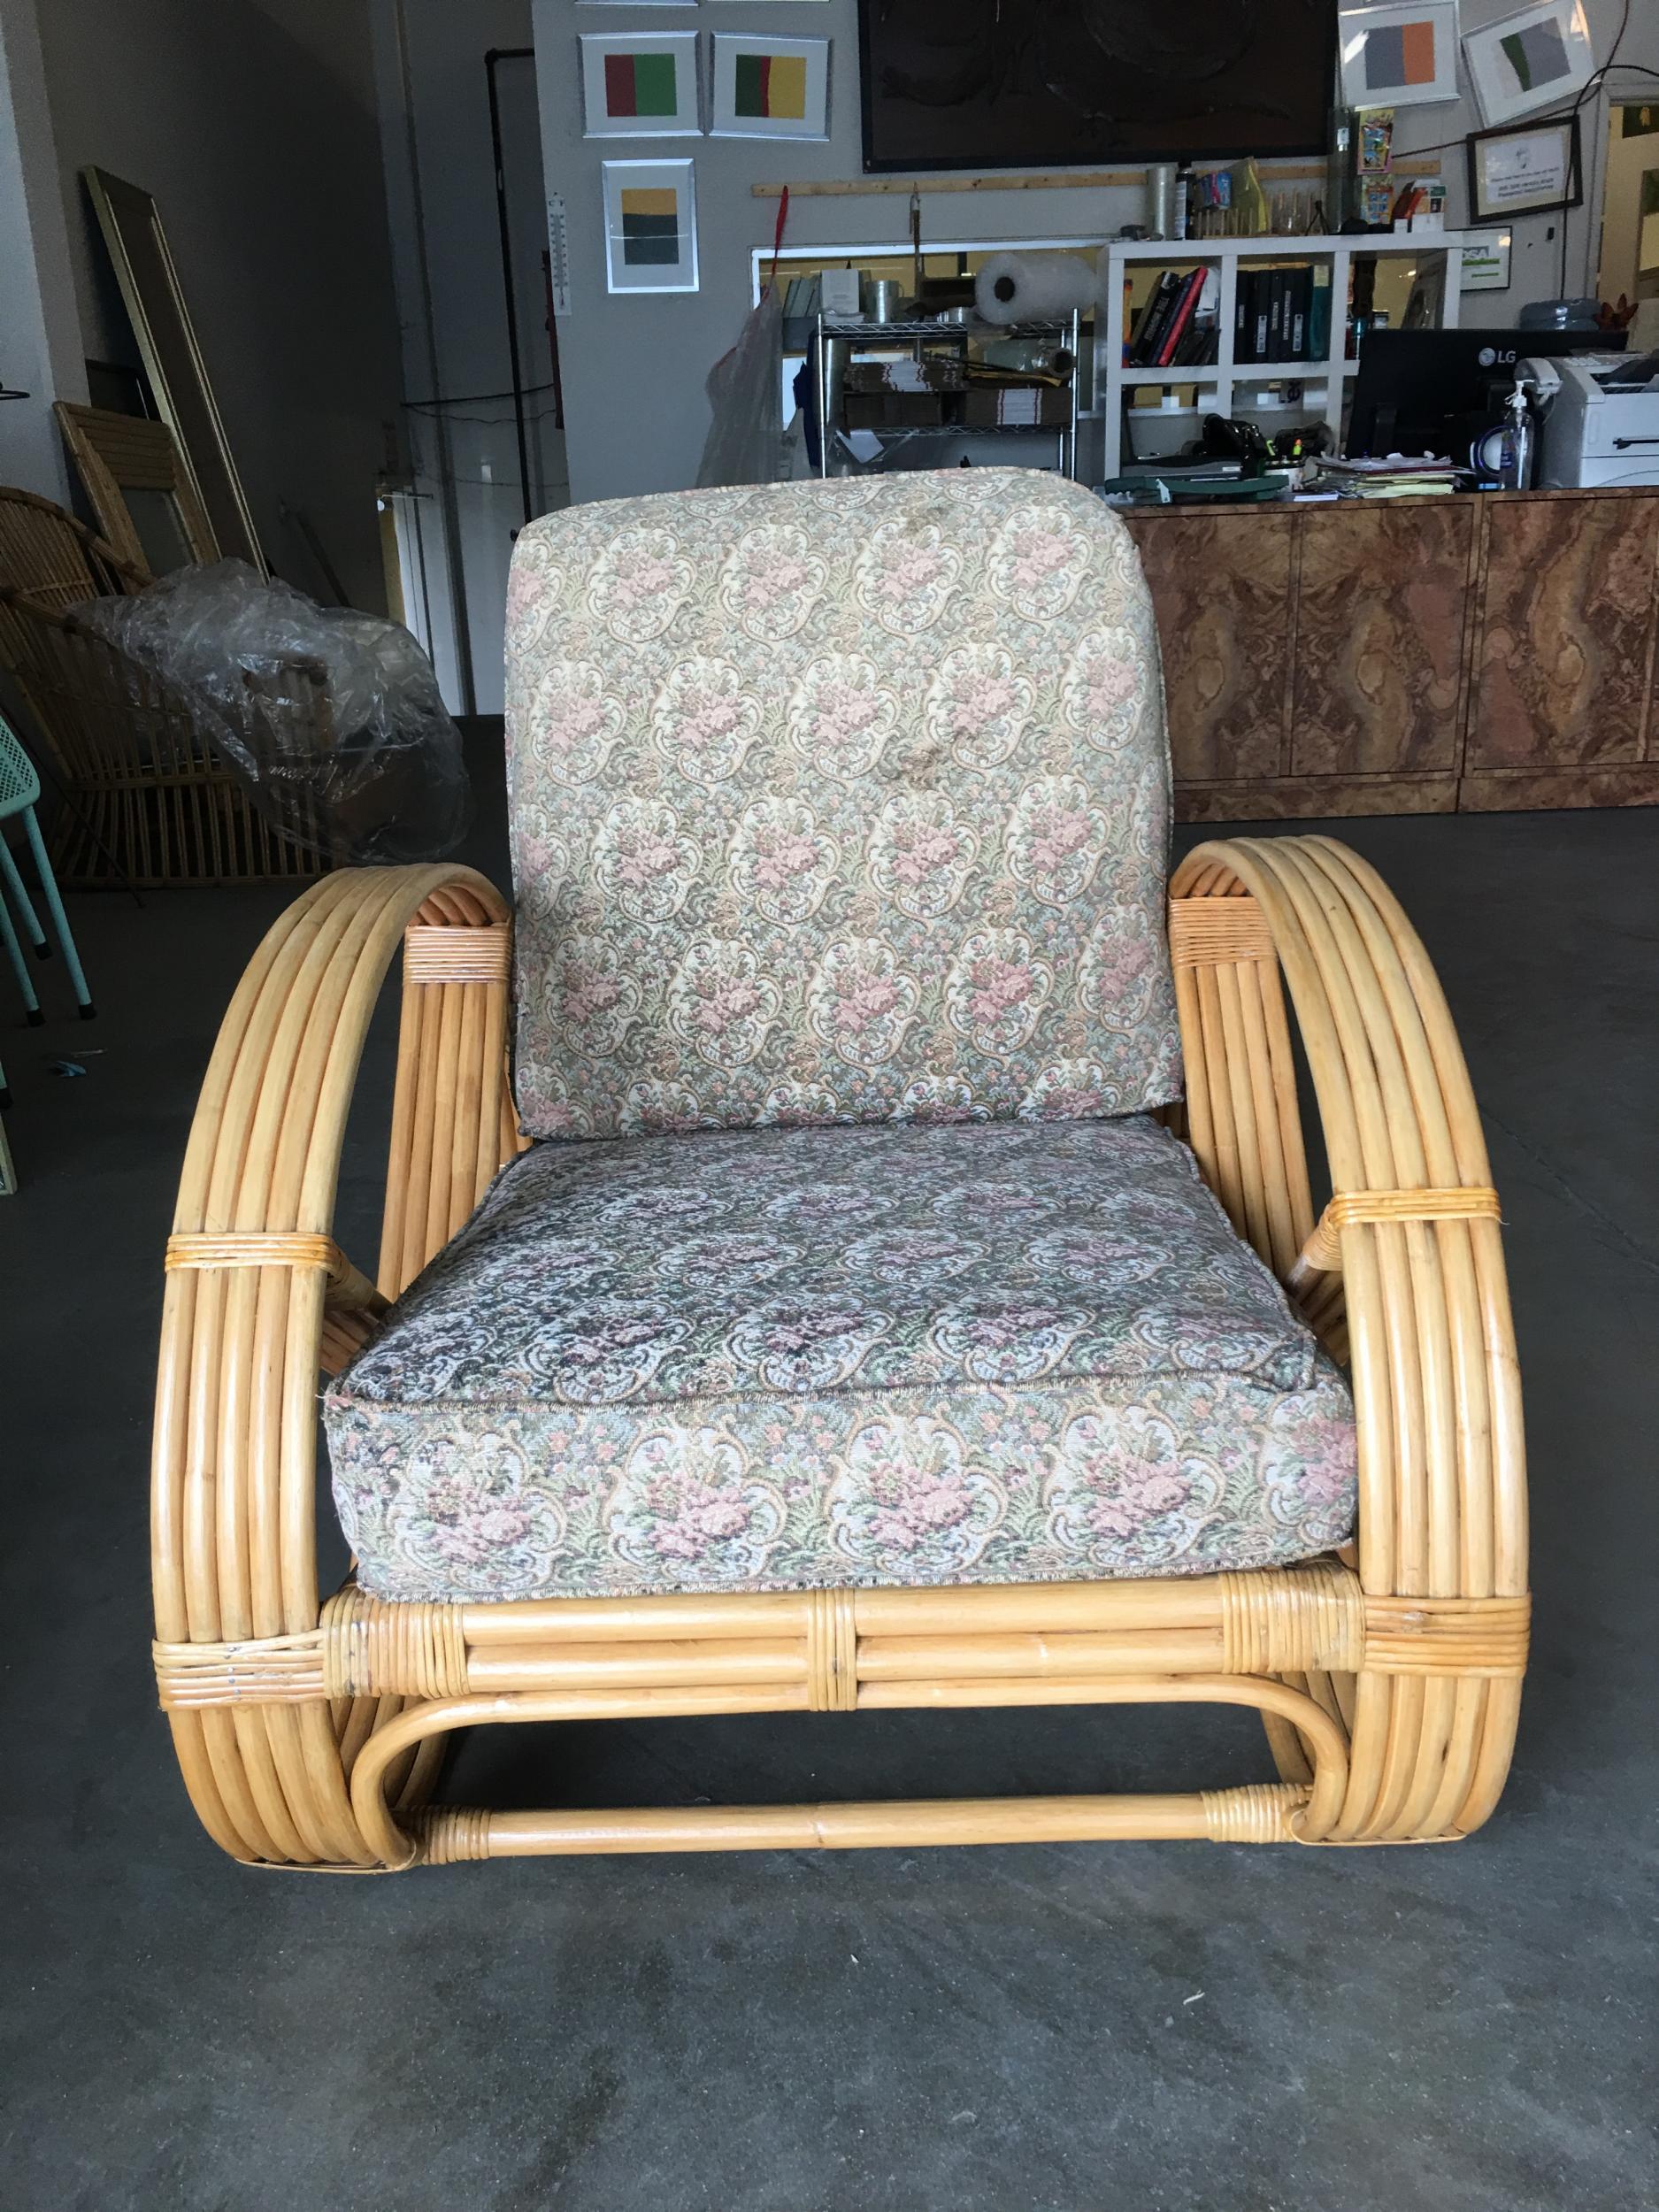 Rare five-strand round full pretzel arm rattan lounge chairs with fancy wicker wrappings.

Restored to new for you. 

This was made by Ritts co, Tropitan , Herb Sr. and Shirley Ritts. Shirley was an American interior designer, furniture designer,